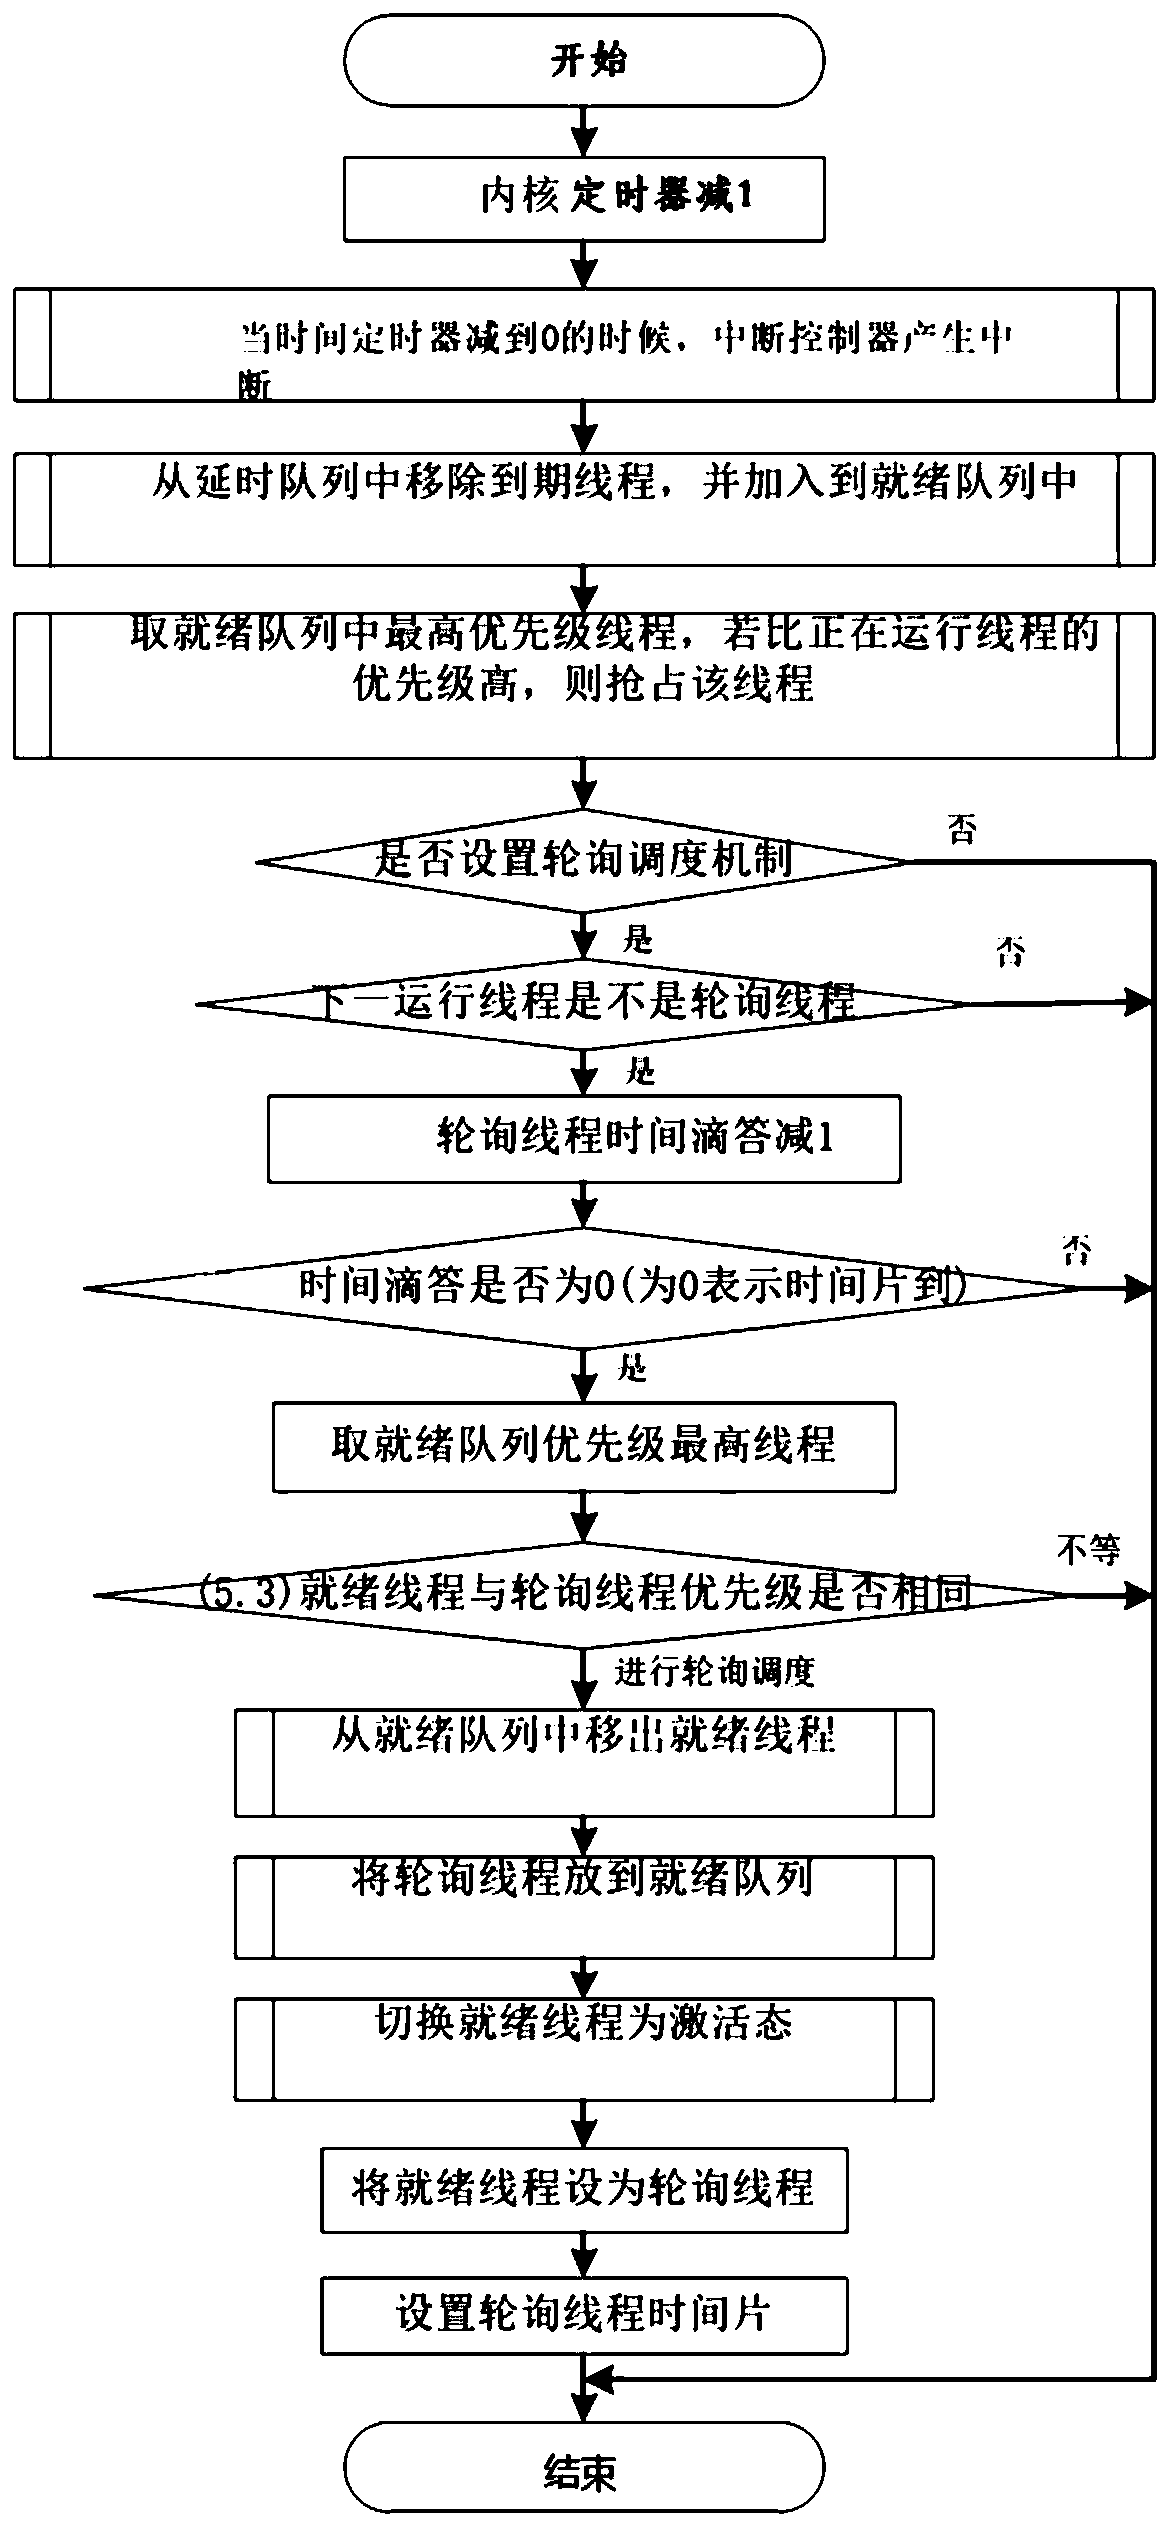 Task scheduling processing system and method of embedded real-time operating system